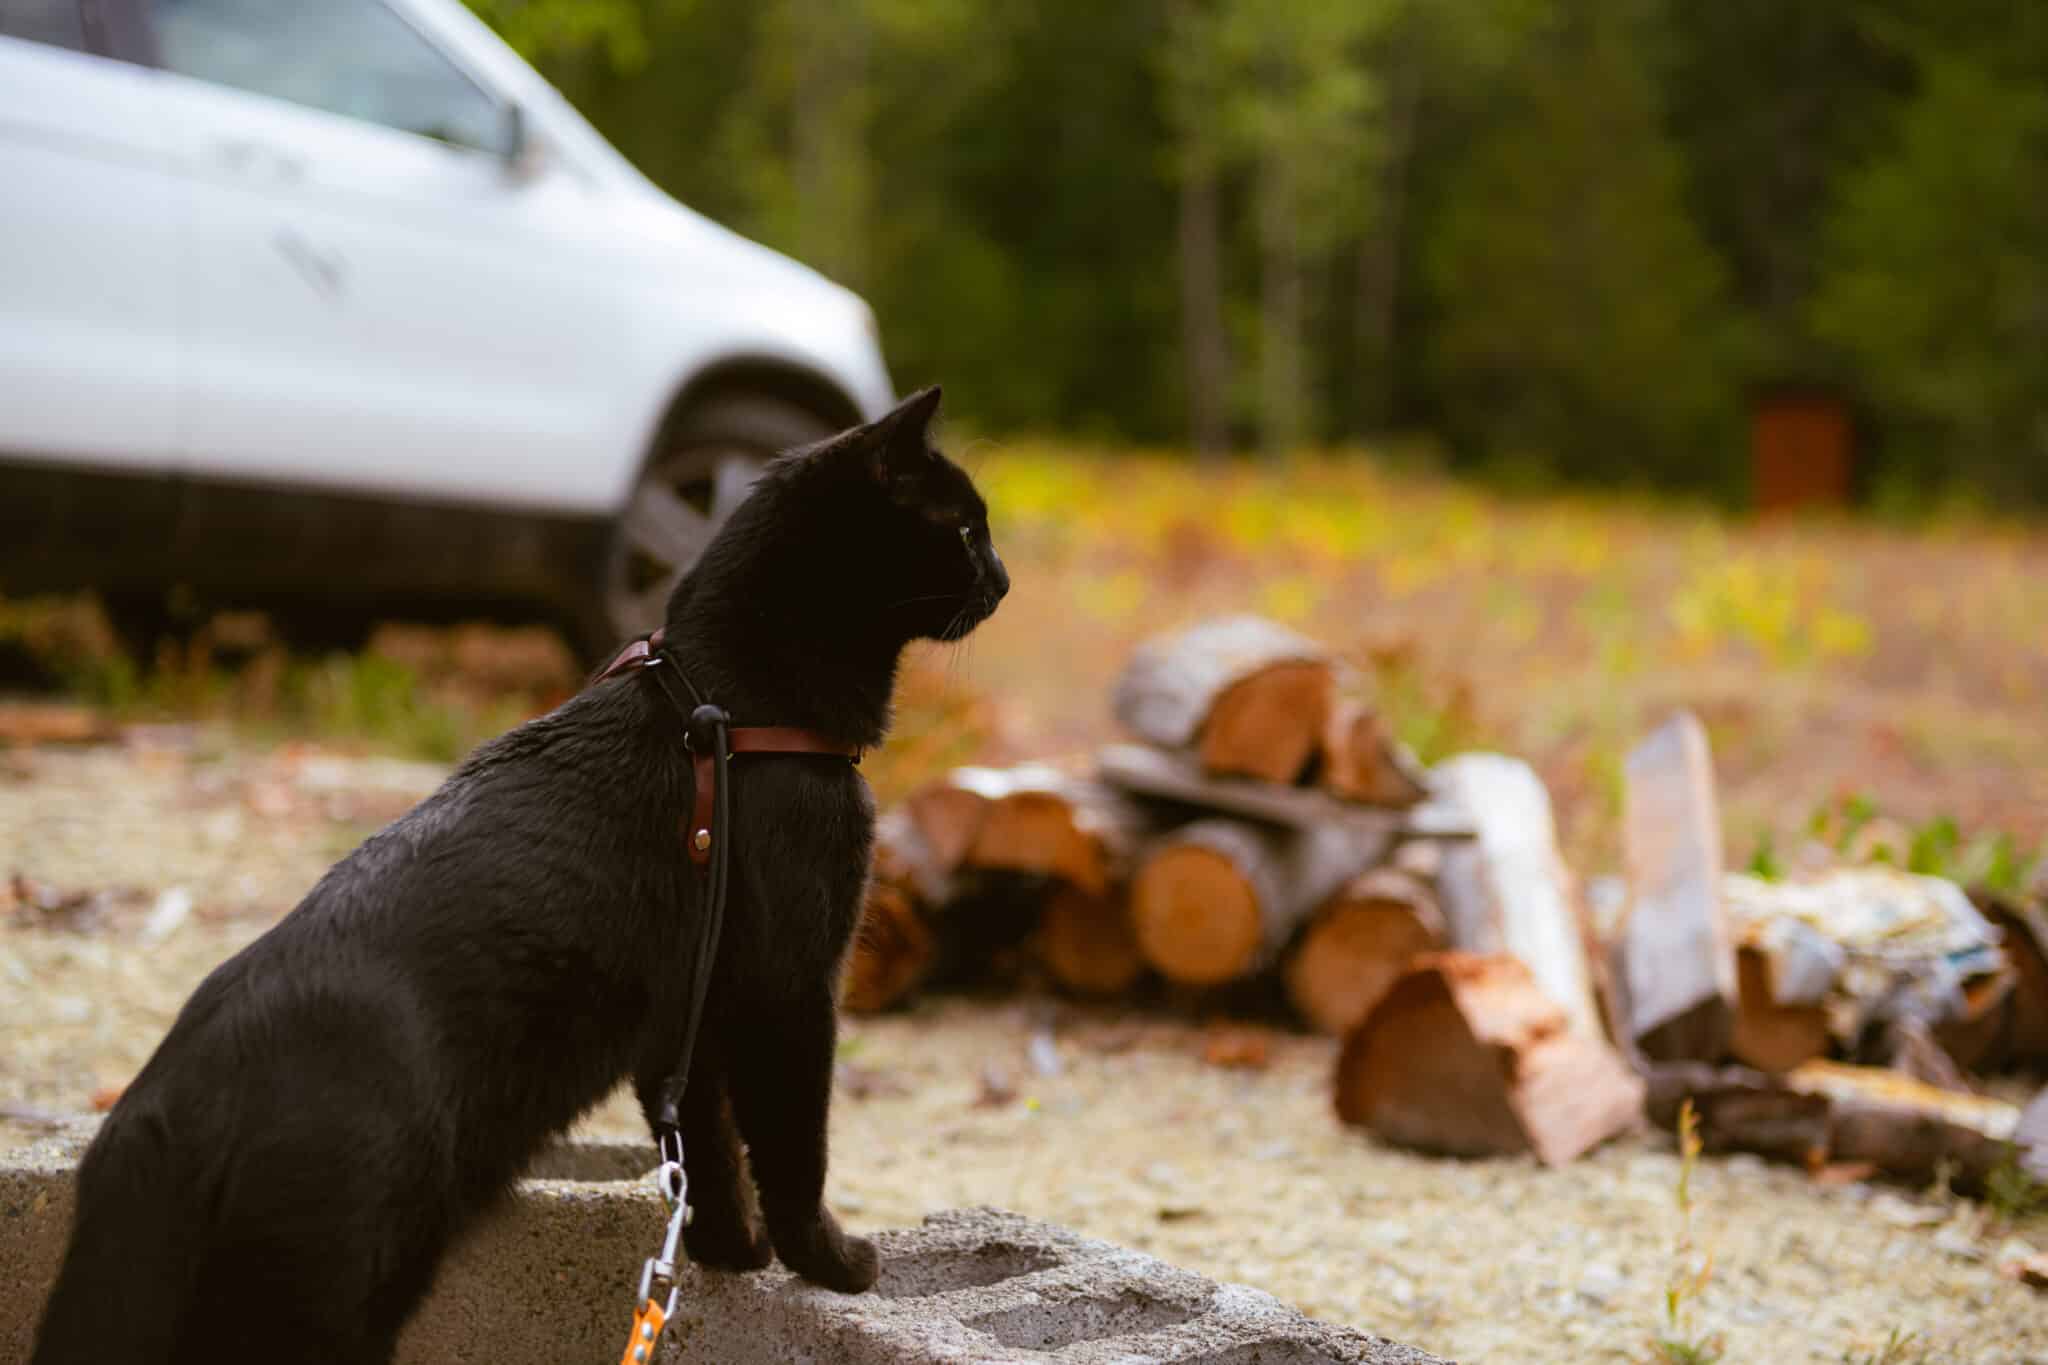 Cat wandering through a campsite, stack of wood is in the background